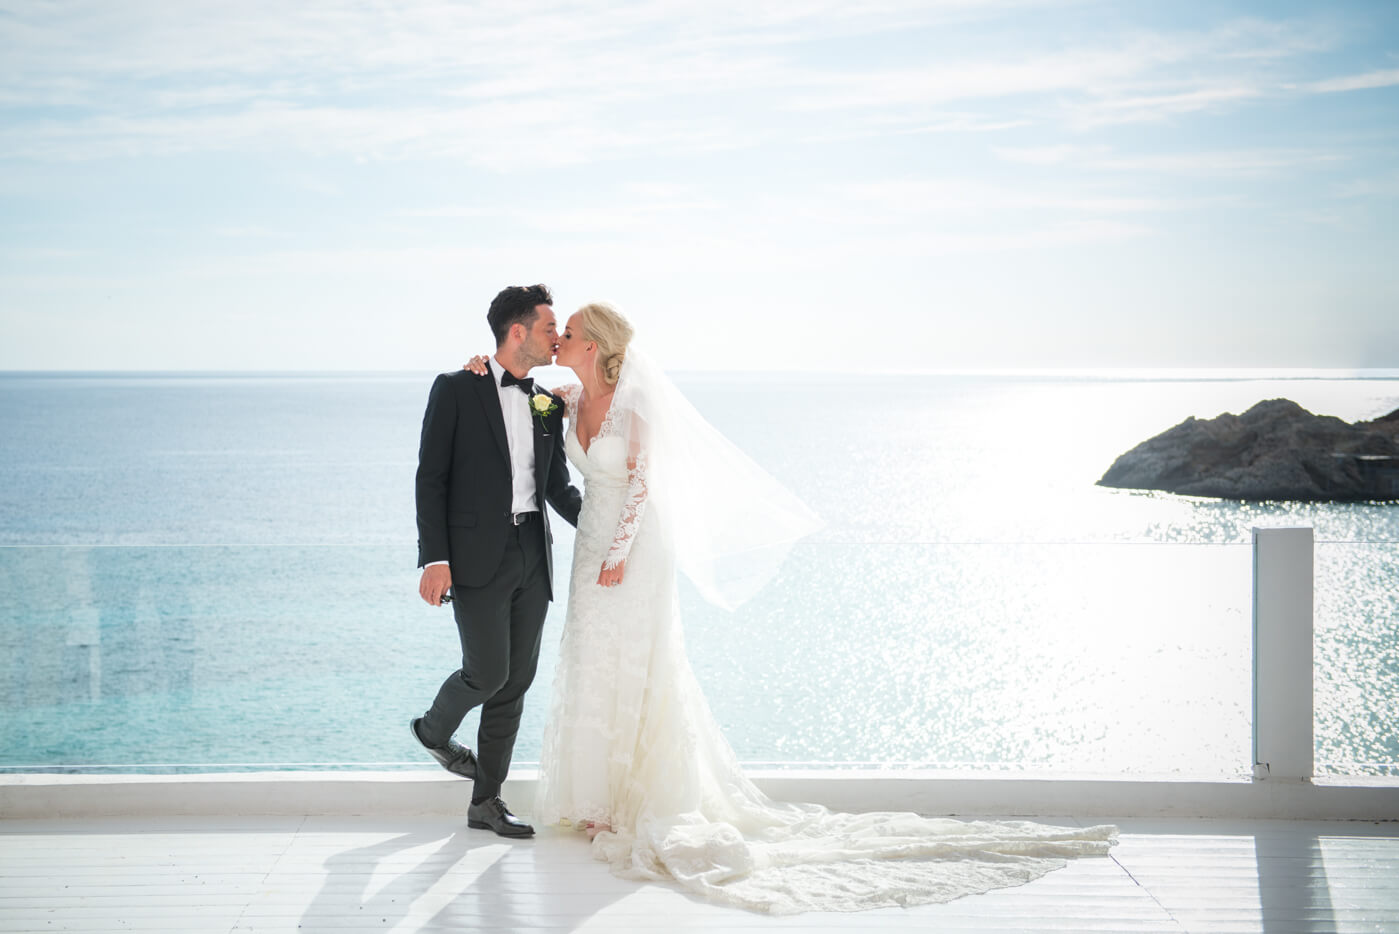 gypsy westwood photography, newlyweds kissing with Mediterranean in background